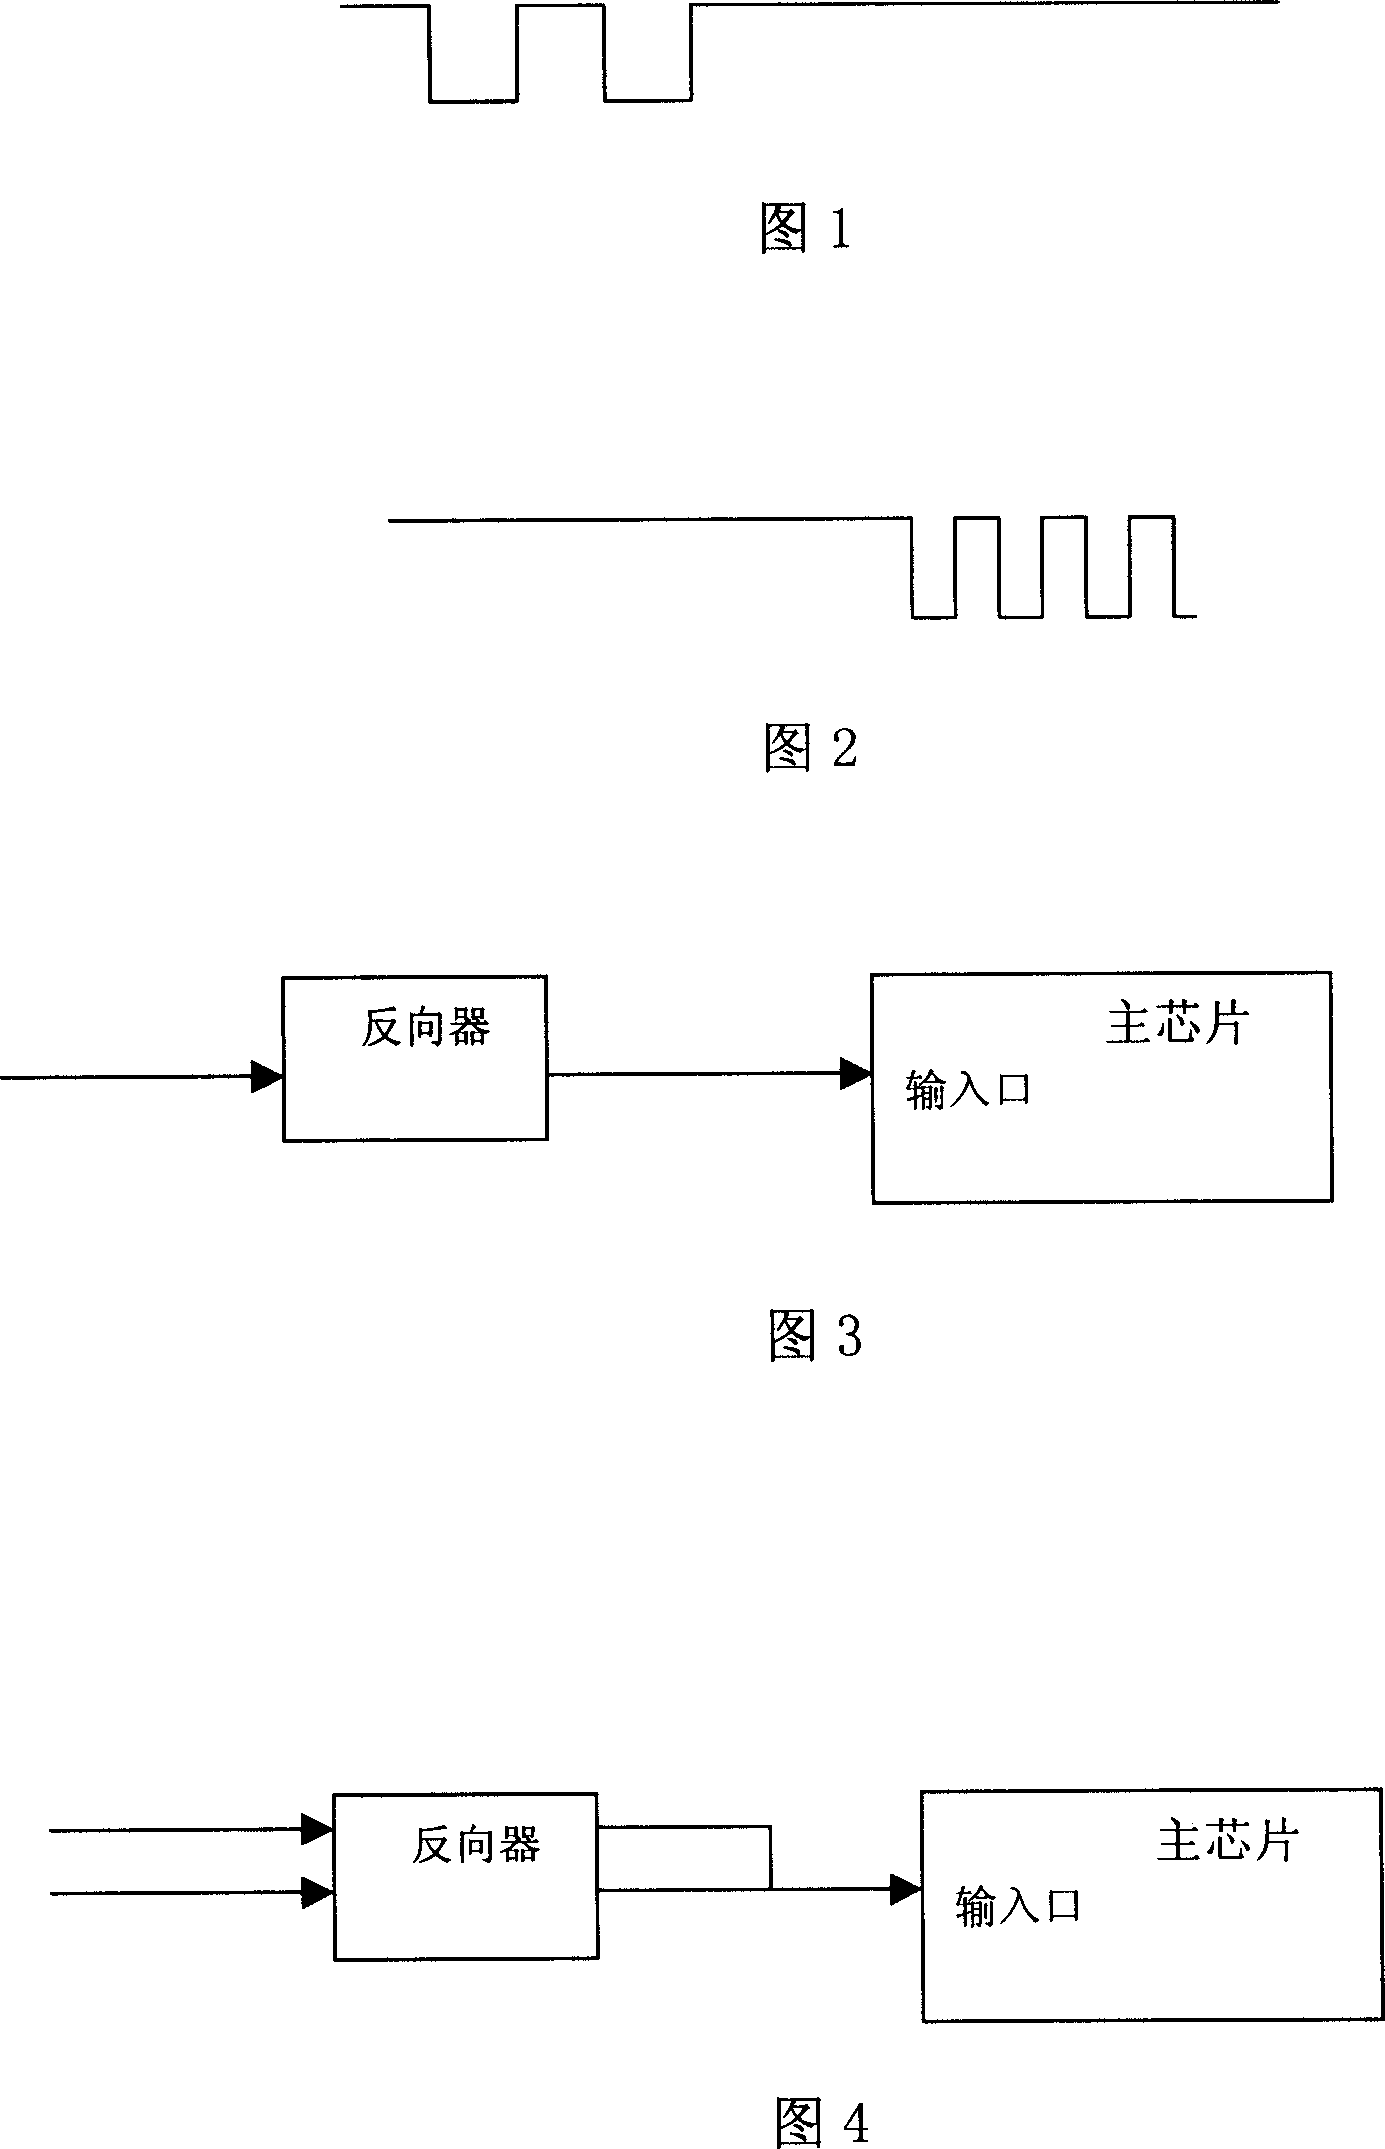 Vide frequency display device signal detecting method and its circuit